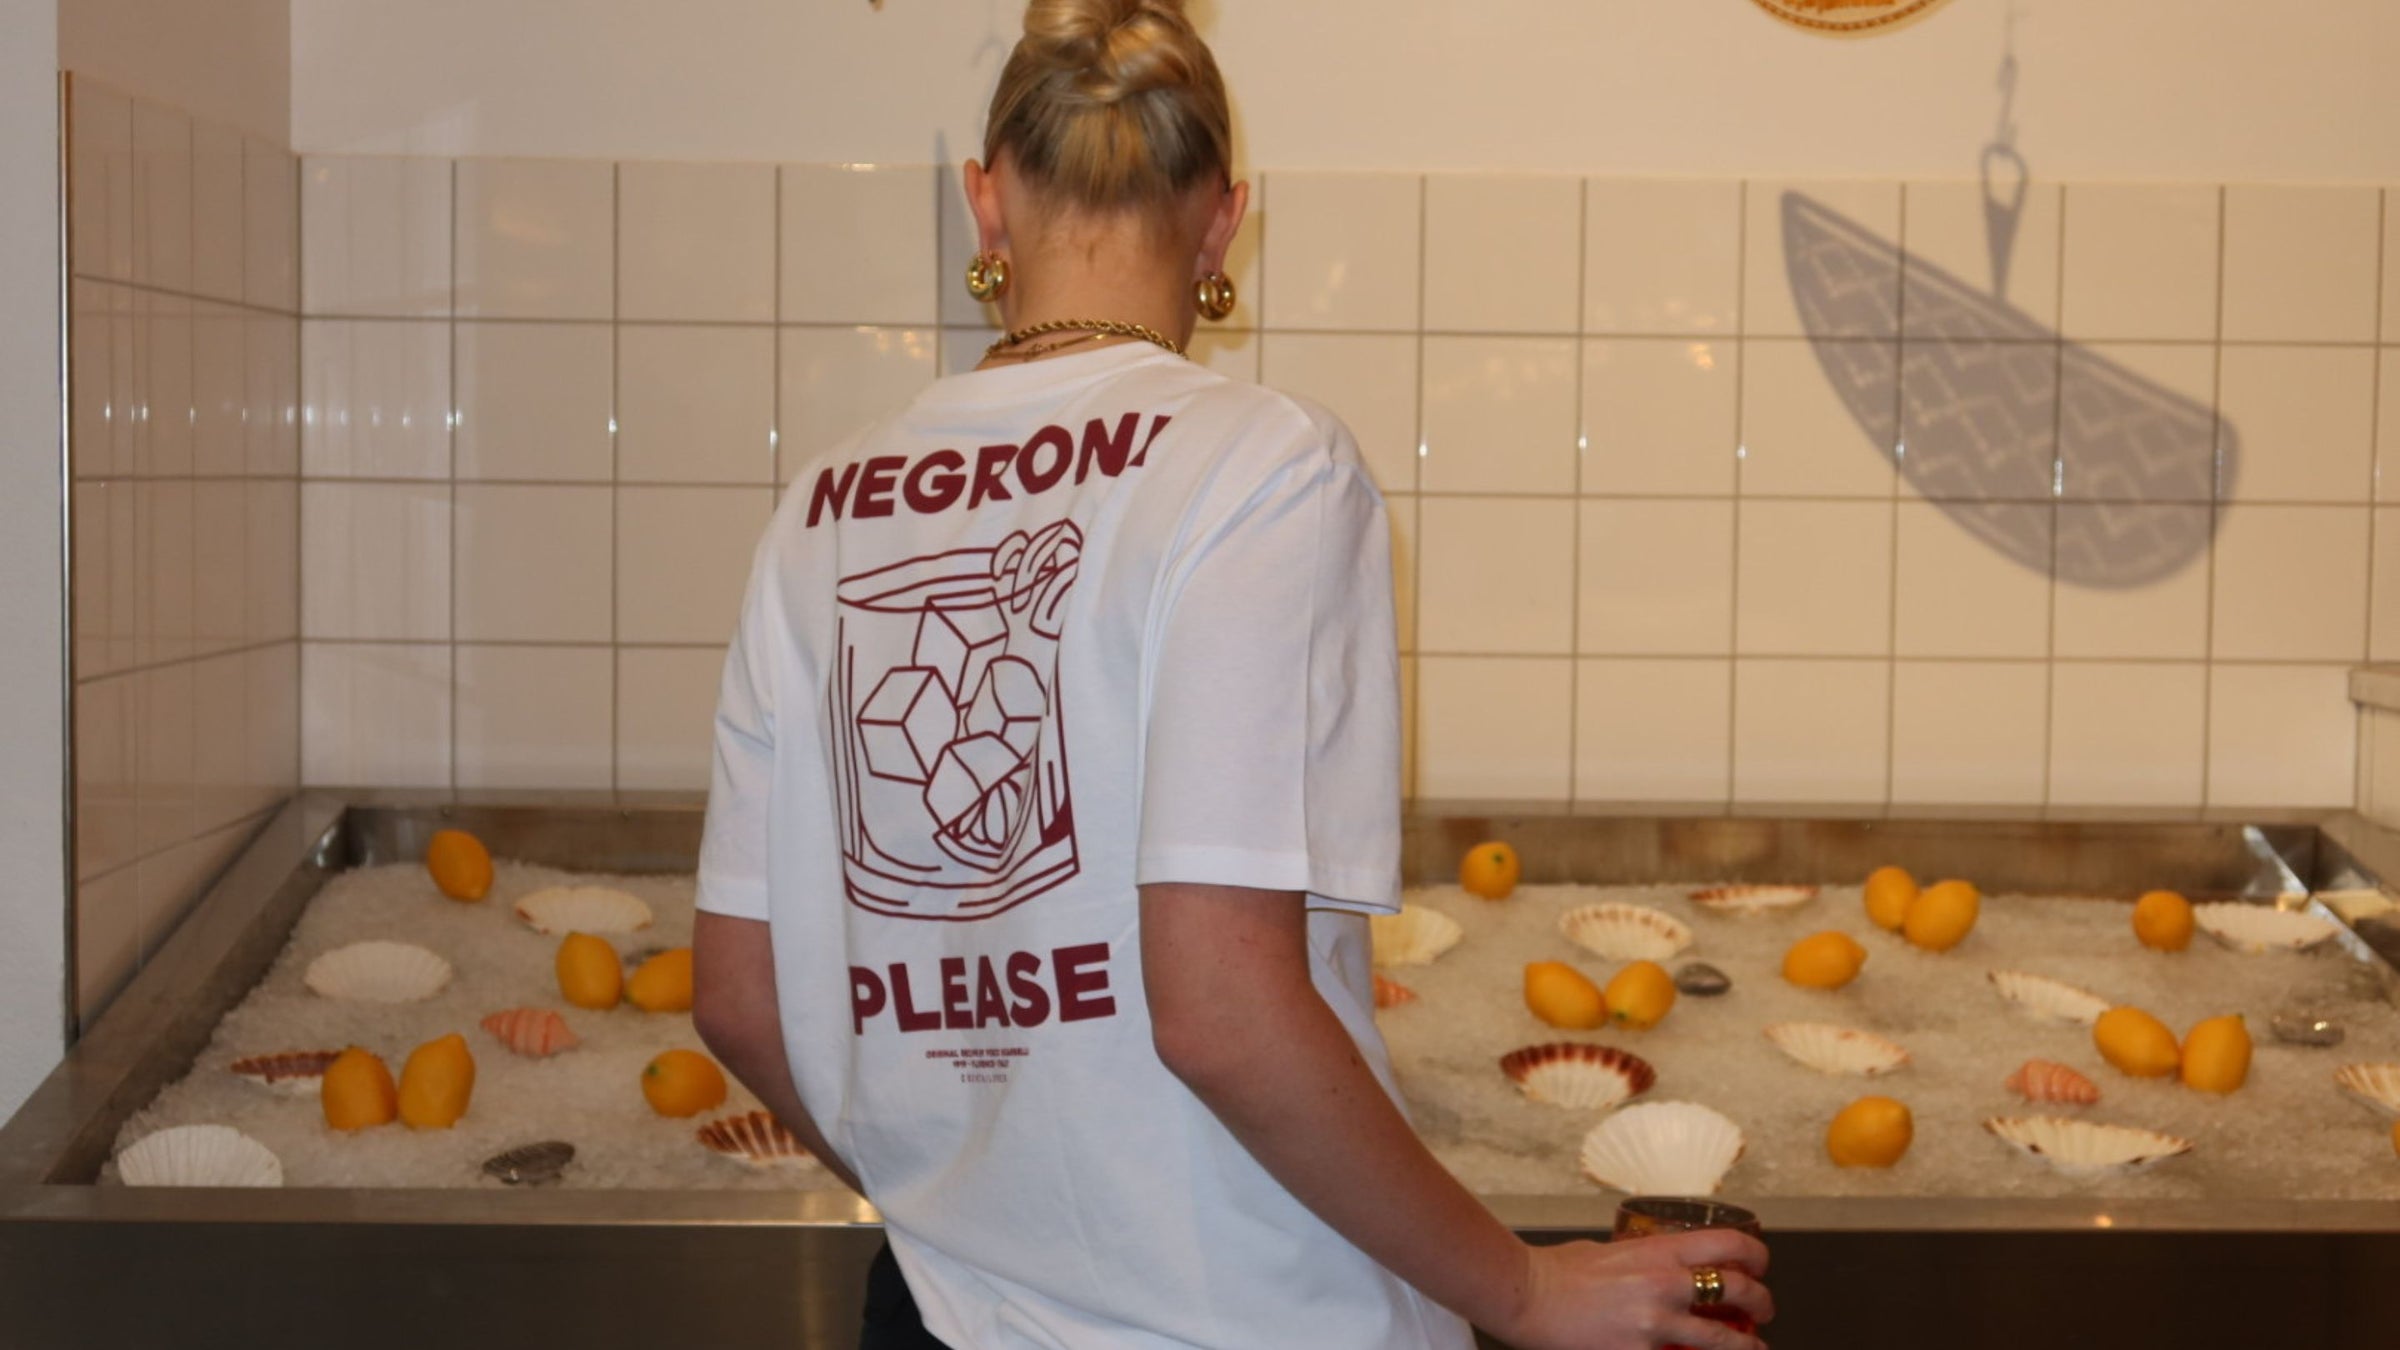 Louise in The Negroni Please T-Shirt